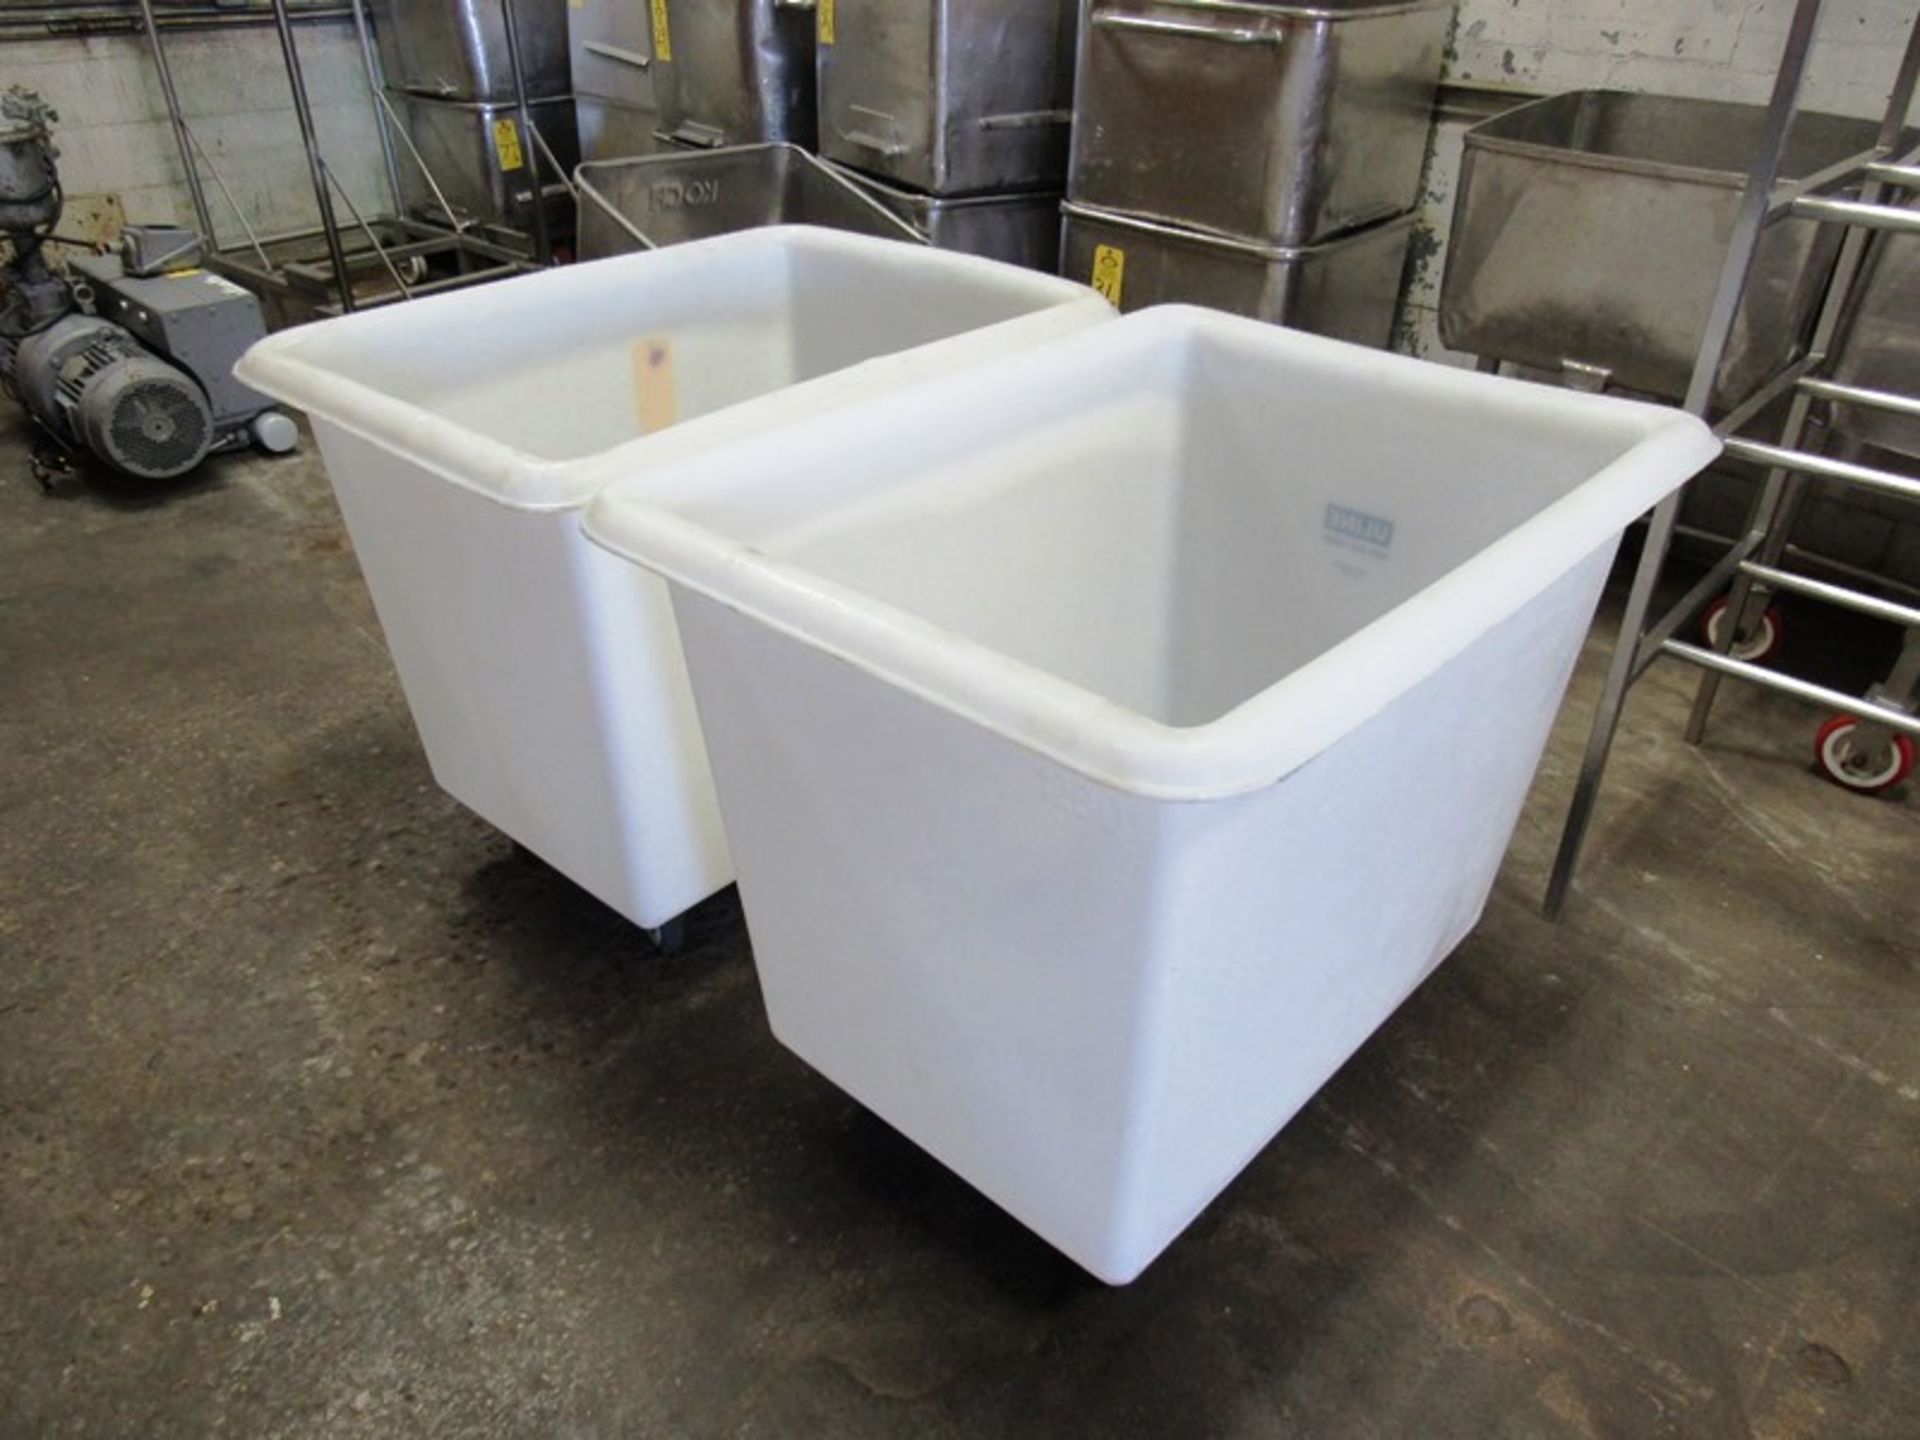 Uline Portable Plastic Totes, 24" W X 34" L X 26" D (Located in Plano, IL - Loading Fee: $10 Removal - Image 2 of 2